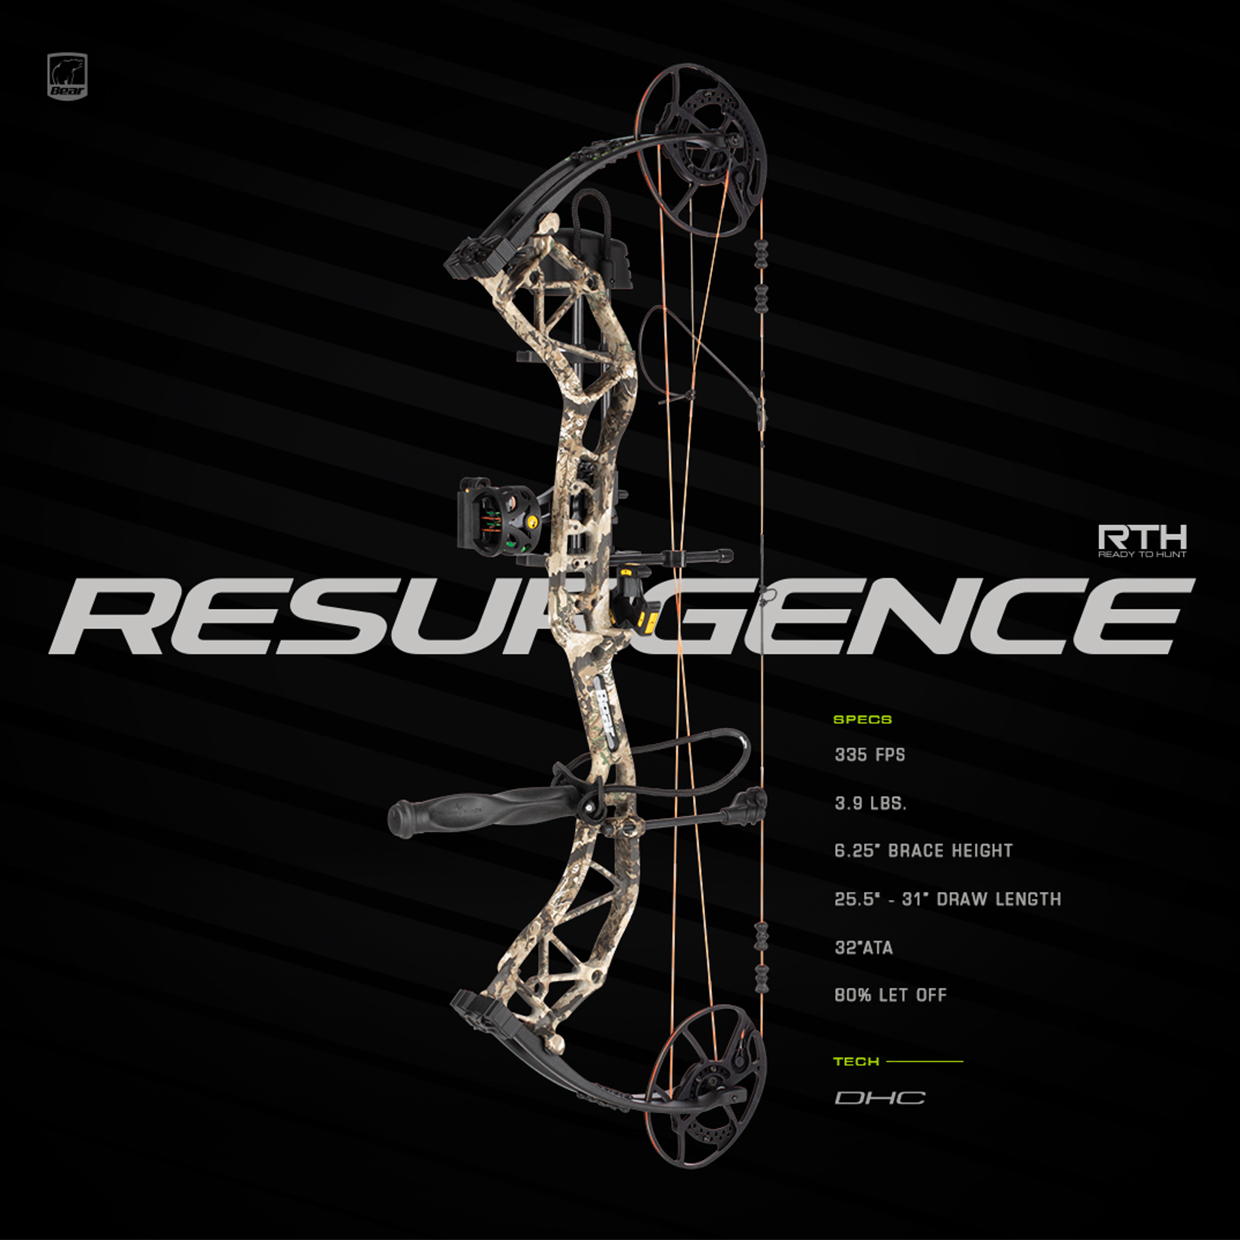 Bear Archery Announces 2022 Performance and Technology Loaded Lineup o